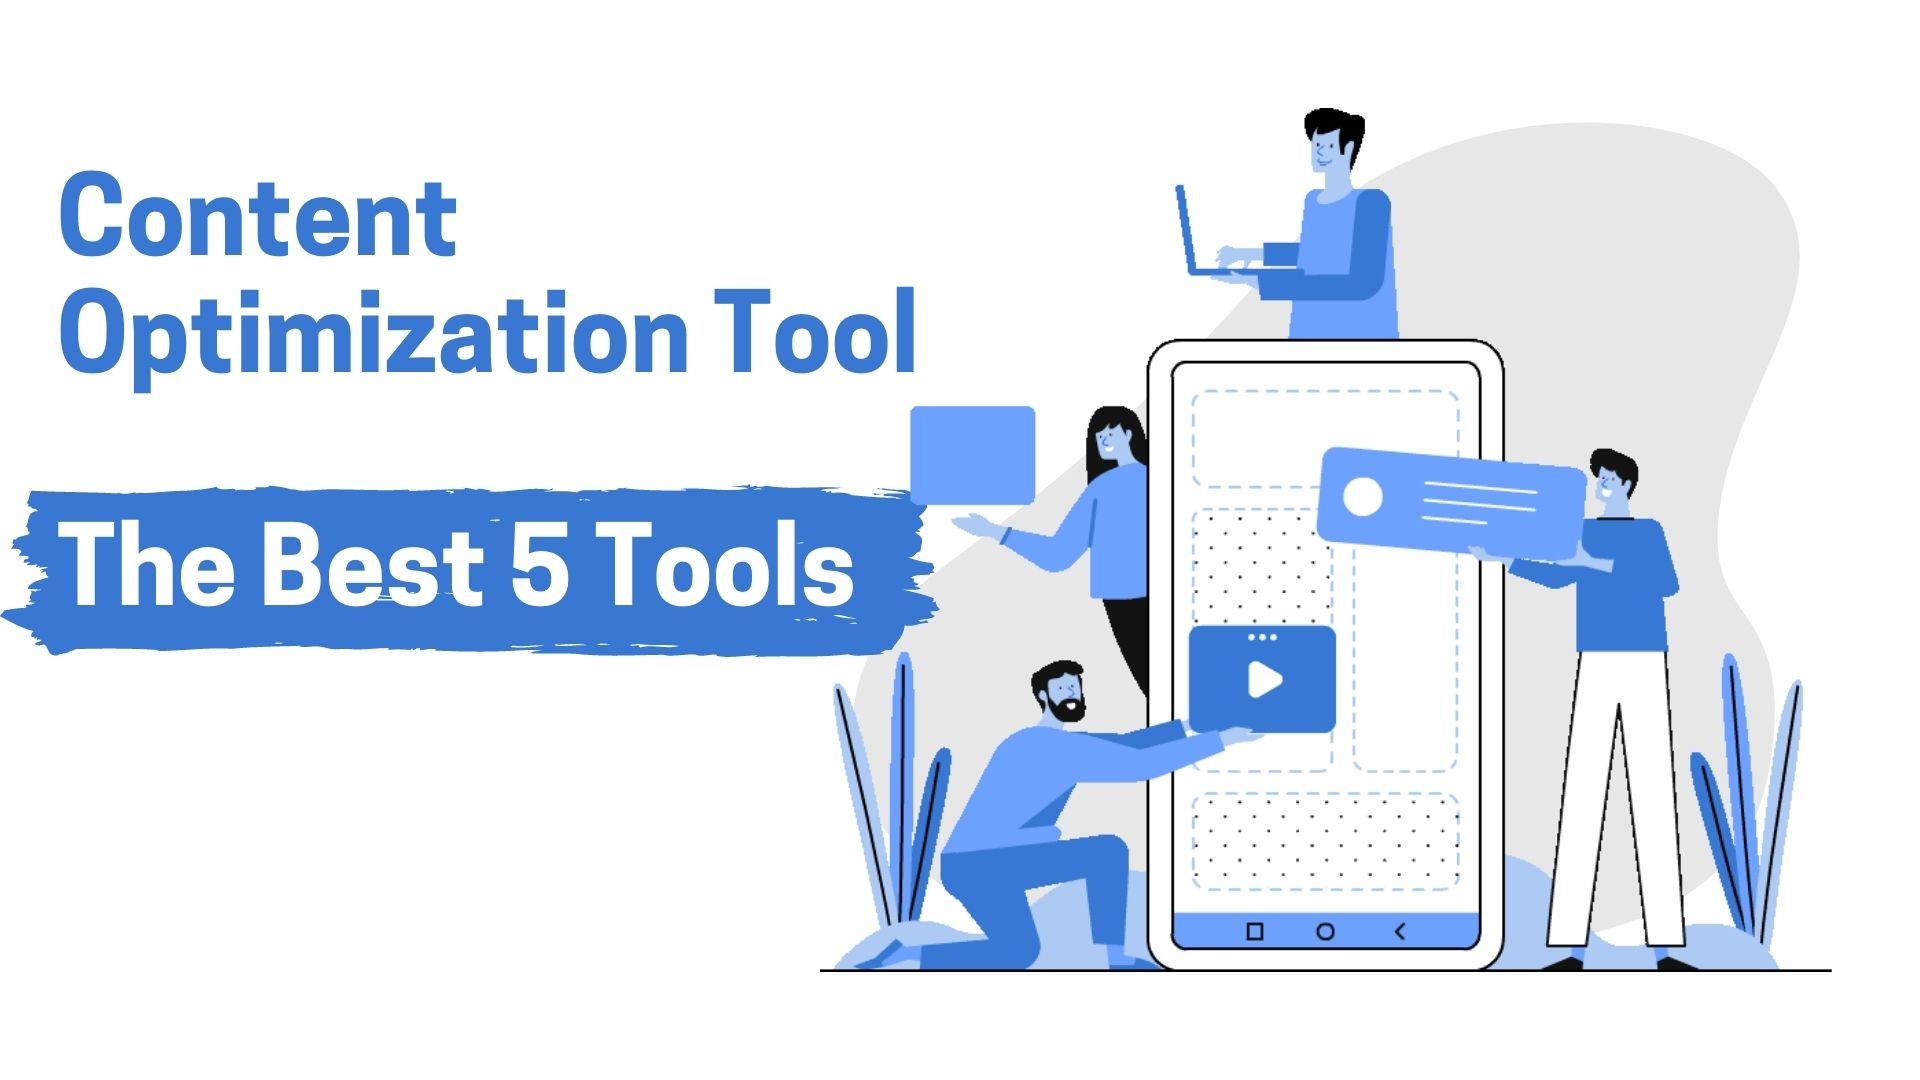 Content Optimization Tool - The Best 5 Tools